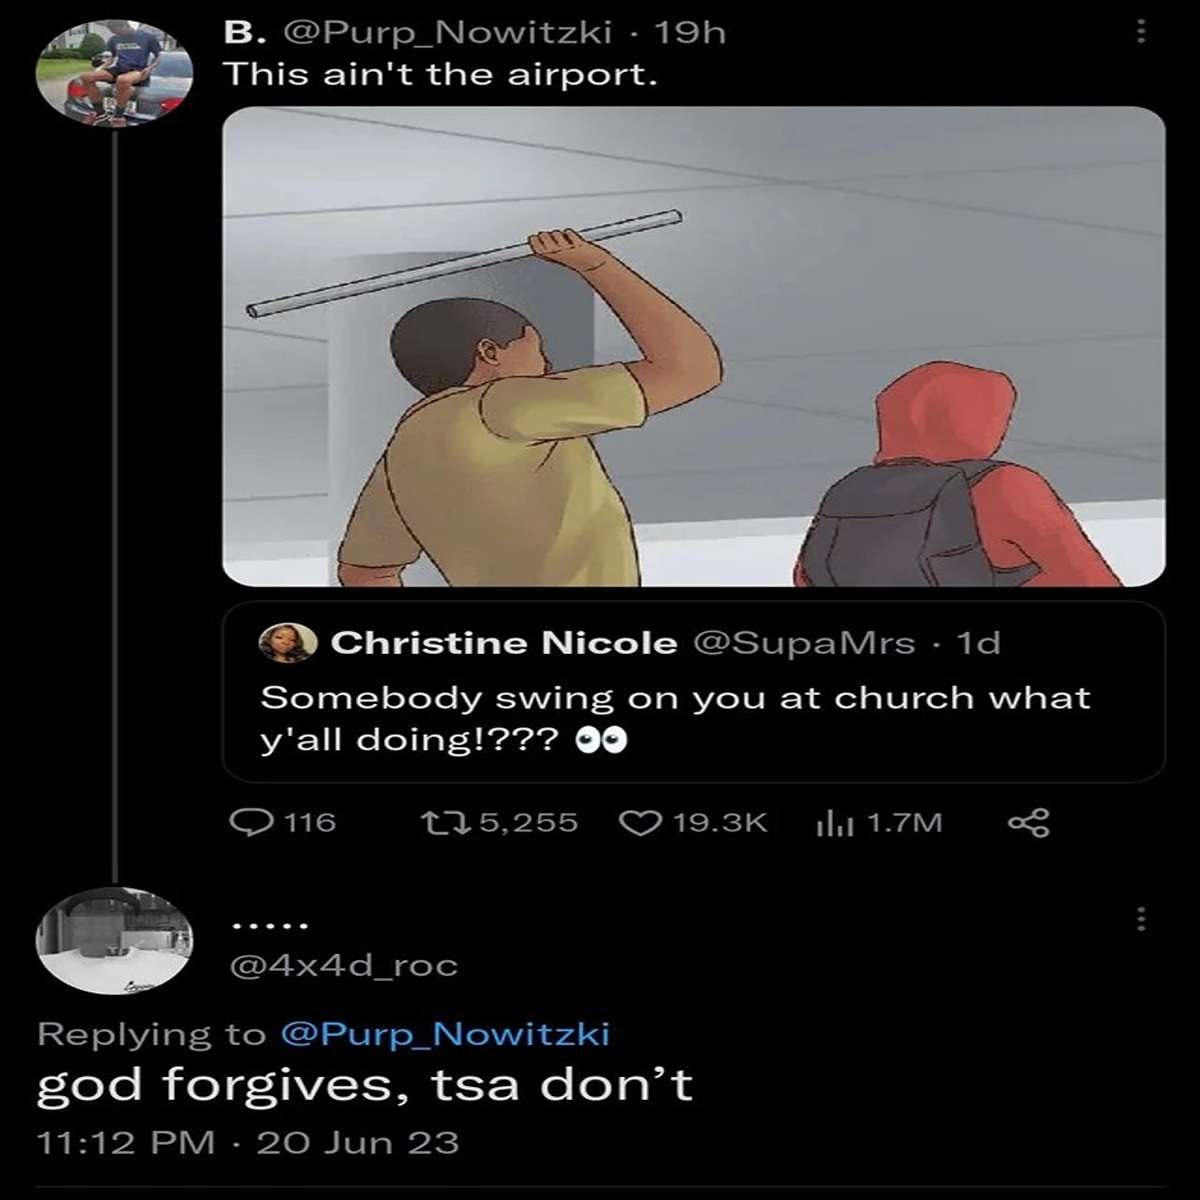 funny tweets and memes - cartoon - B. 19h This ain't the airport. Christine Nicole 1d Somebody swing on you at church what y'all doing!??? 00 116 15,255 1.7M god forgives, tsa don't 20 Jun 23